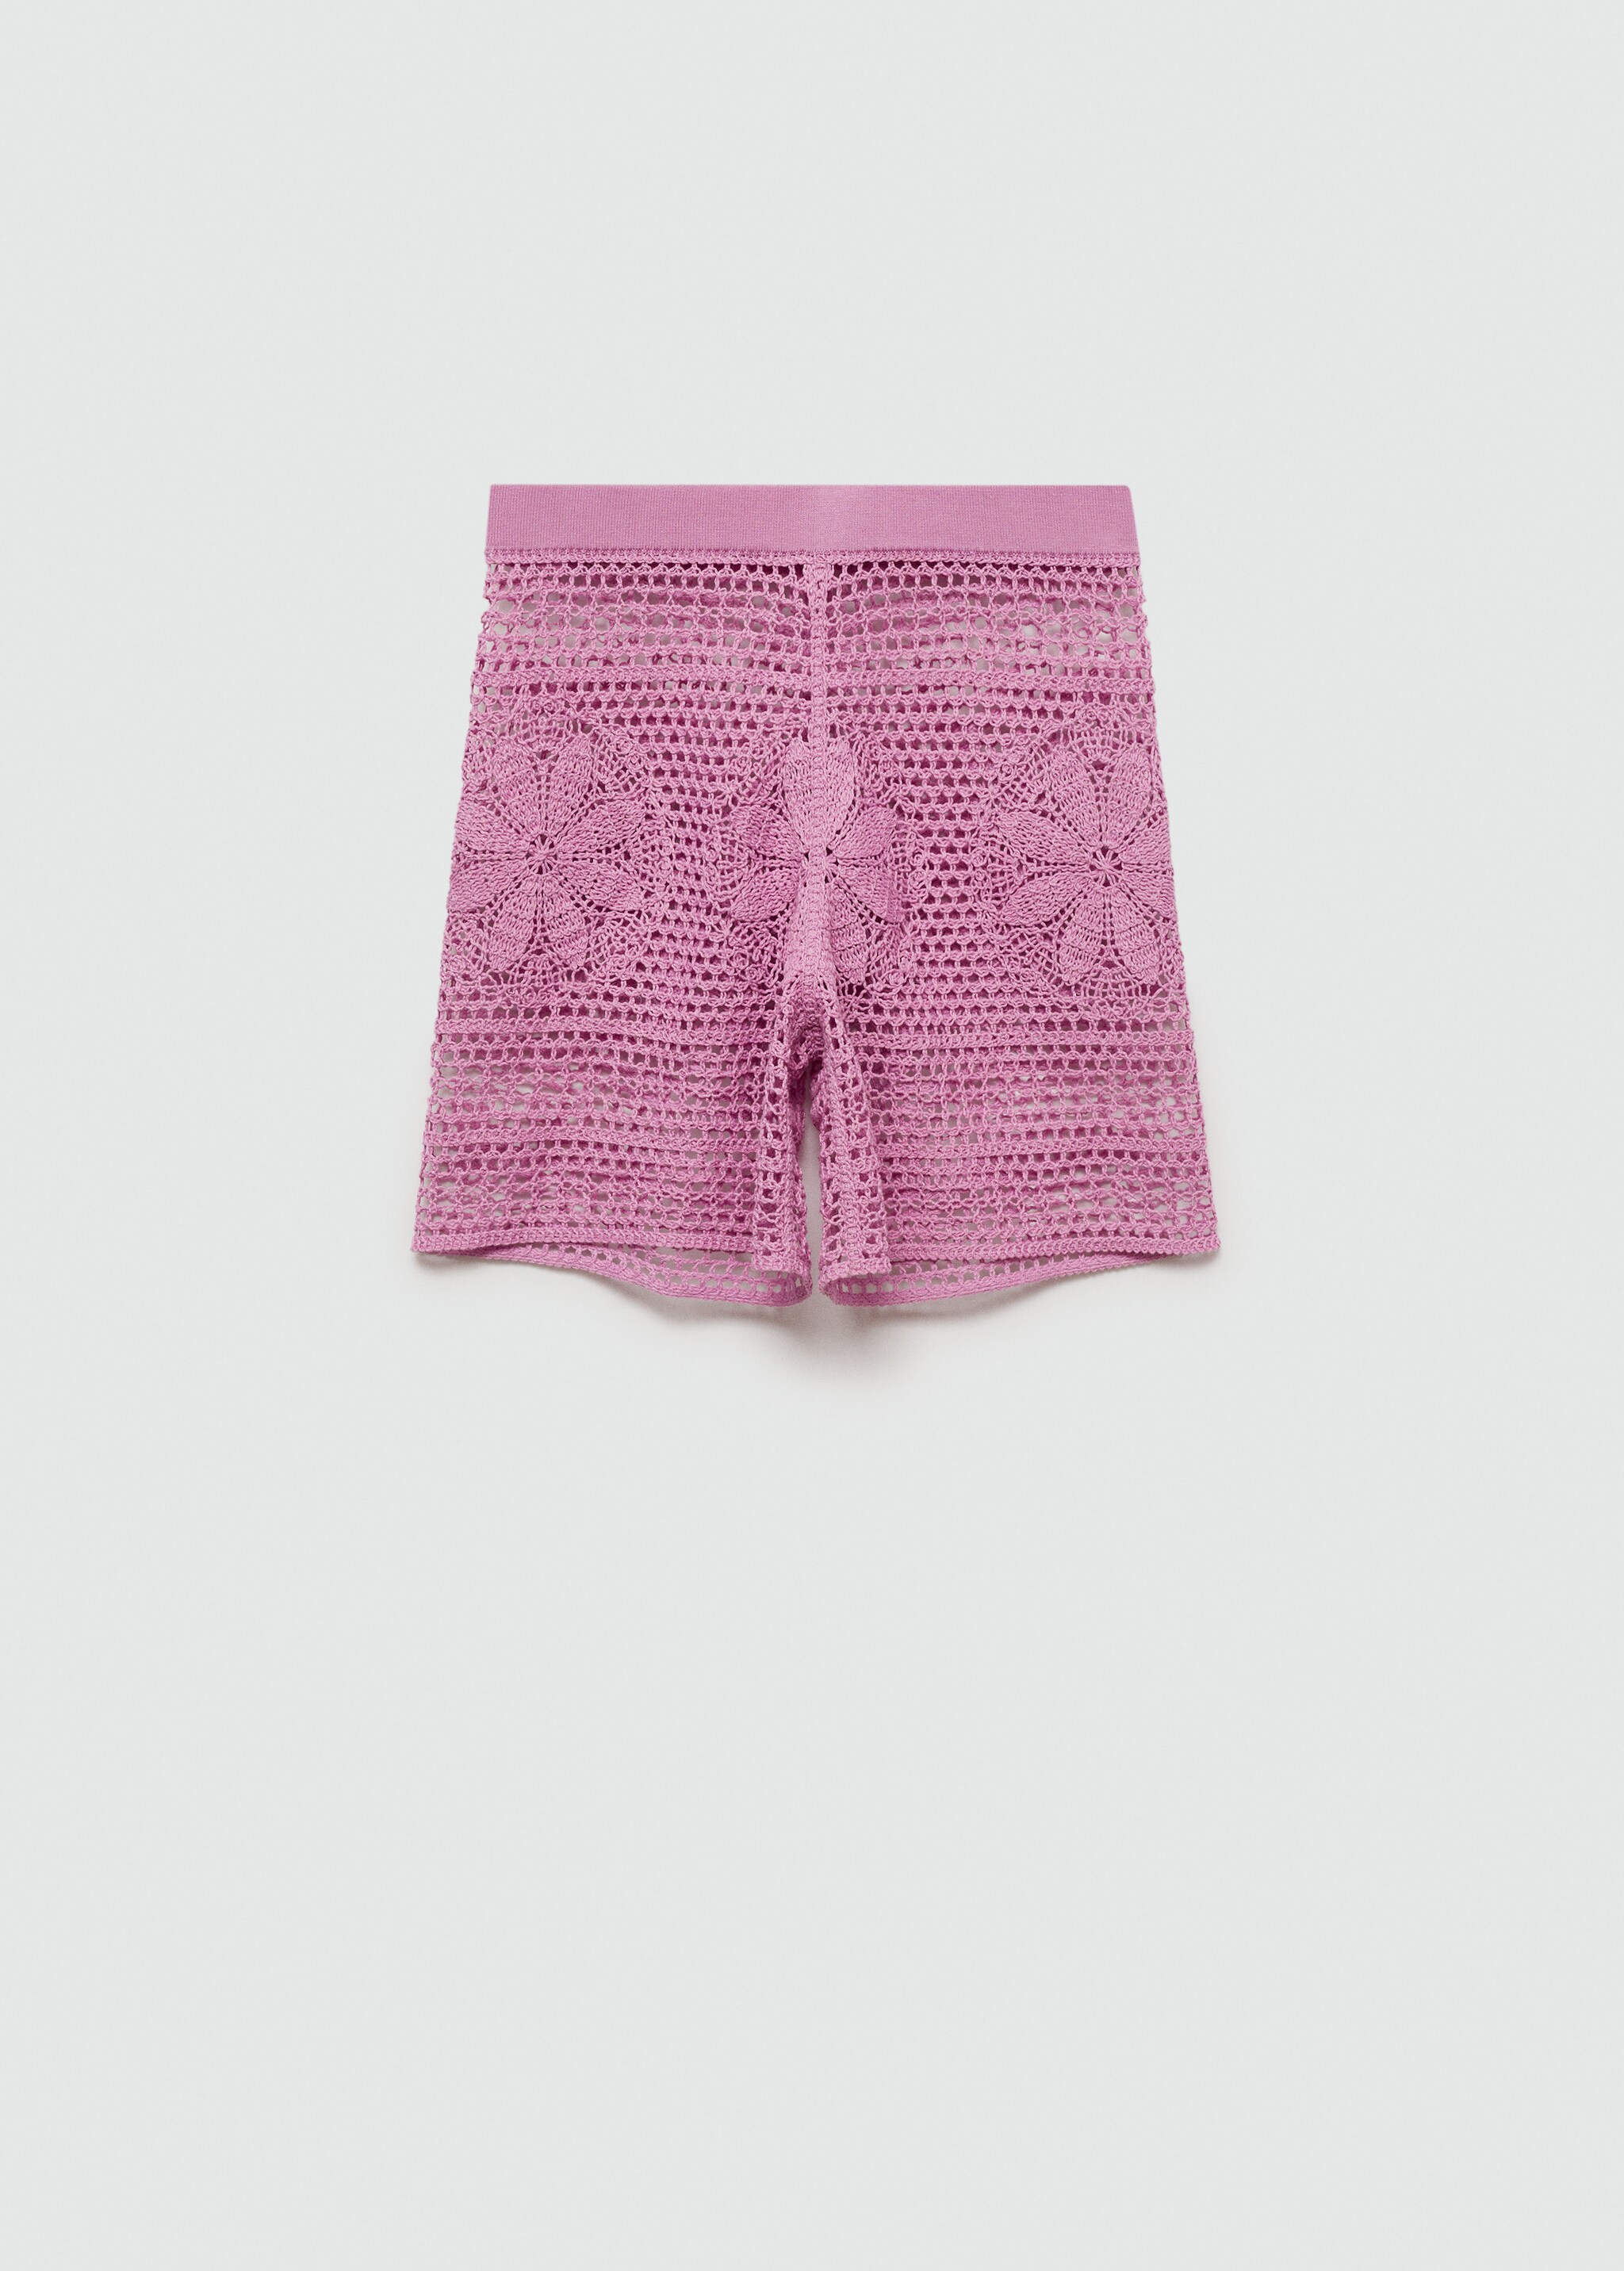 Crochet shorts with flowers - Article without model